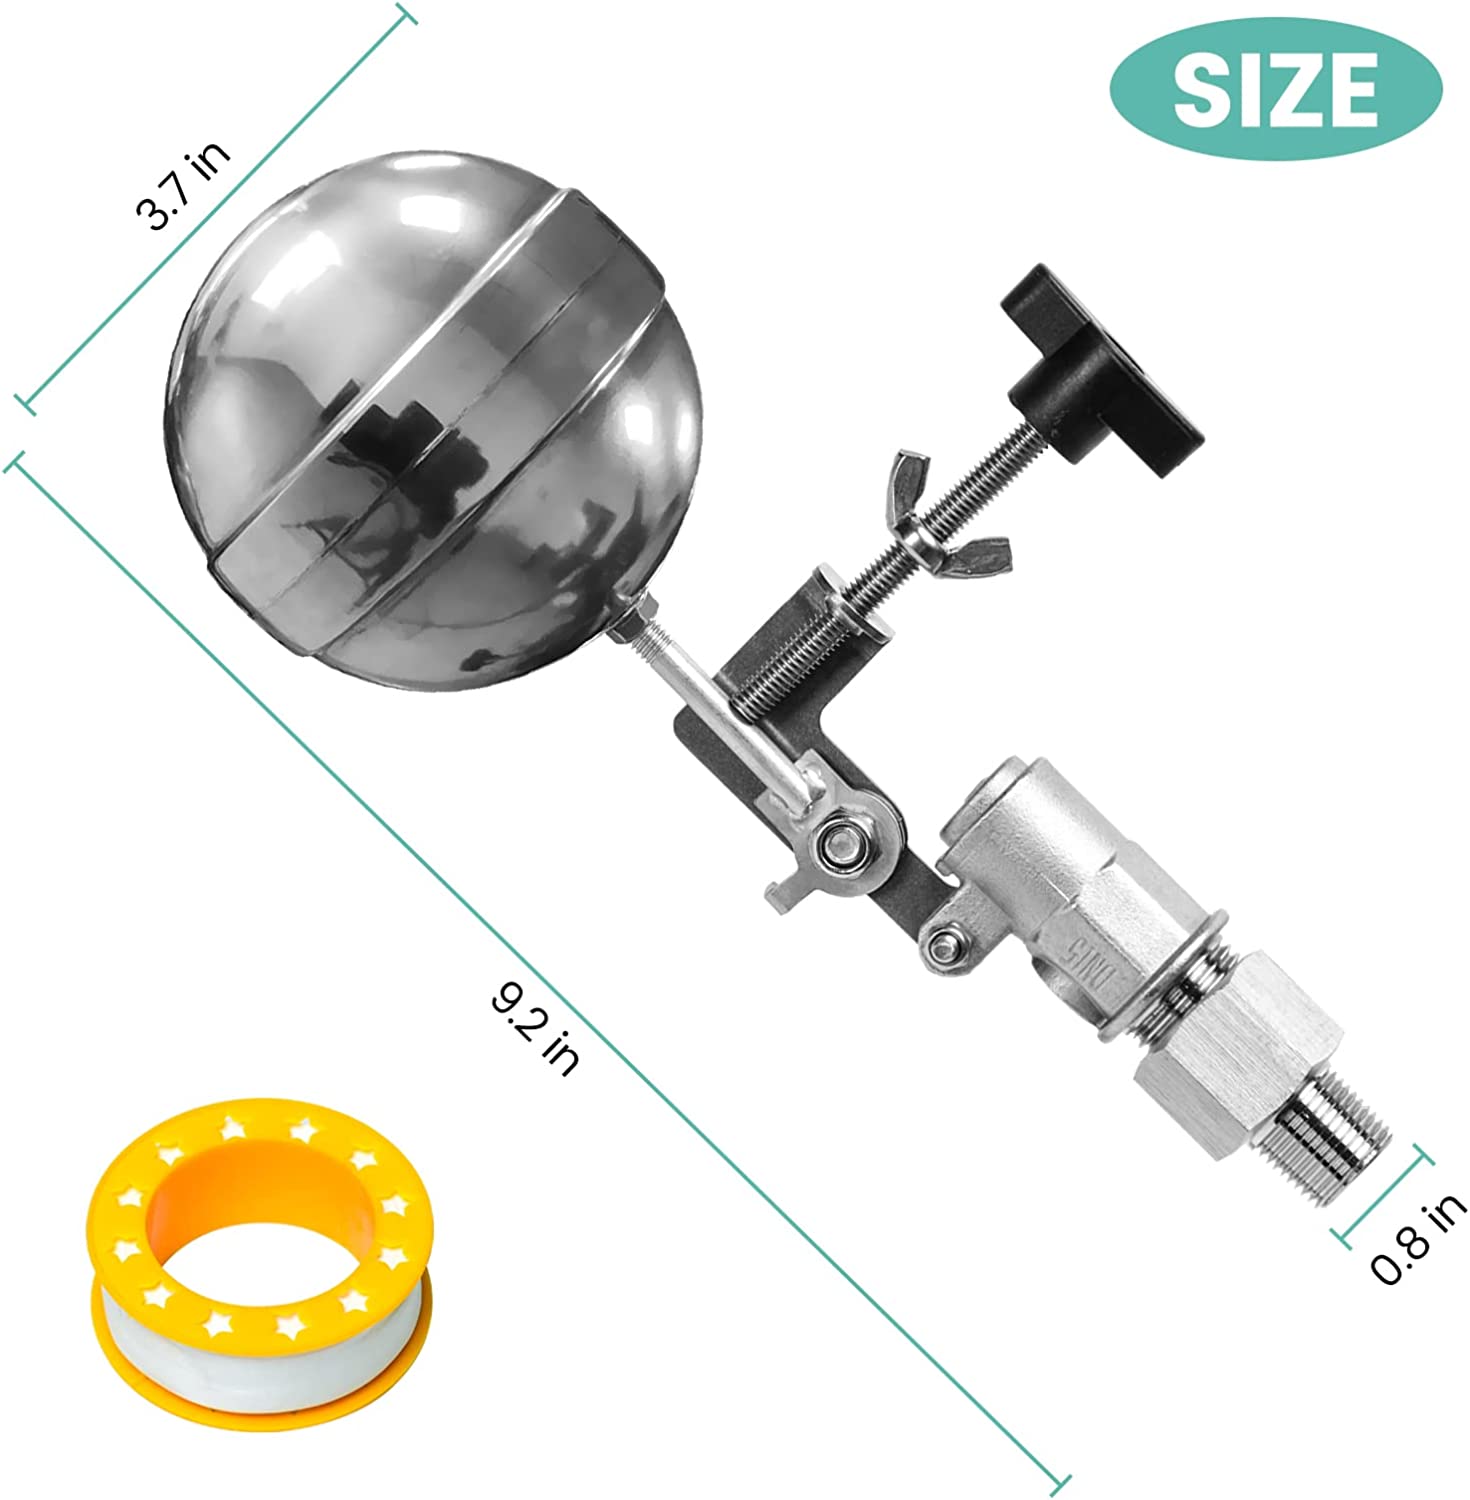 Pool Auto Fill Float Valve, Briidea Adjustable Screw Float Valve with Replacement 3/8'' NPT Male Thread, Perfect for Fountain, Pools, SPA, Water Tanks